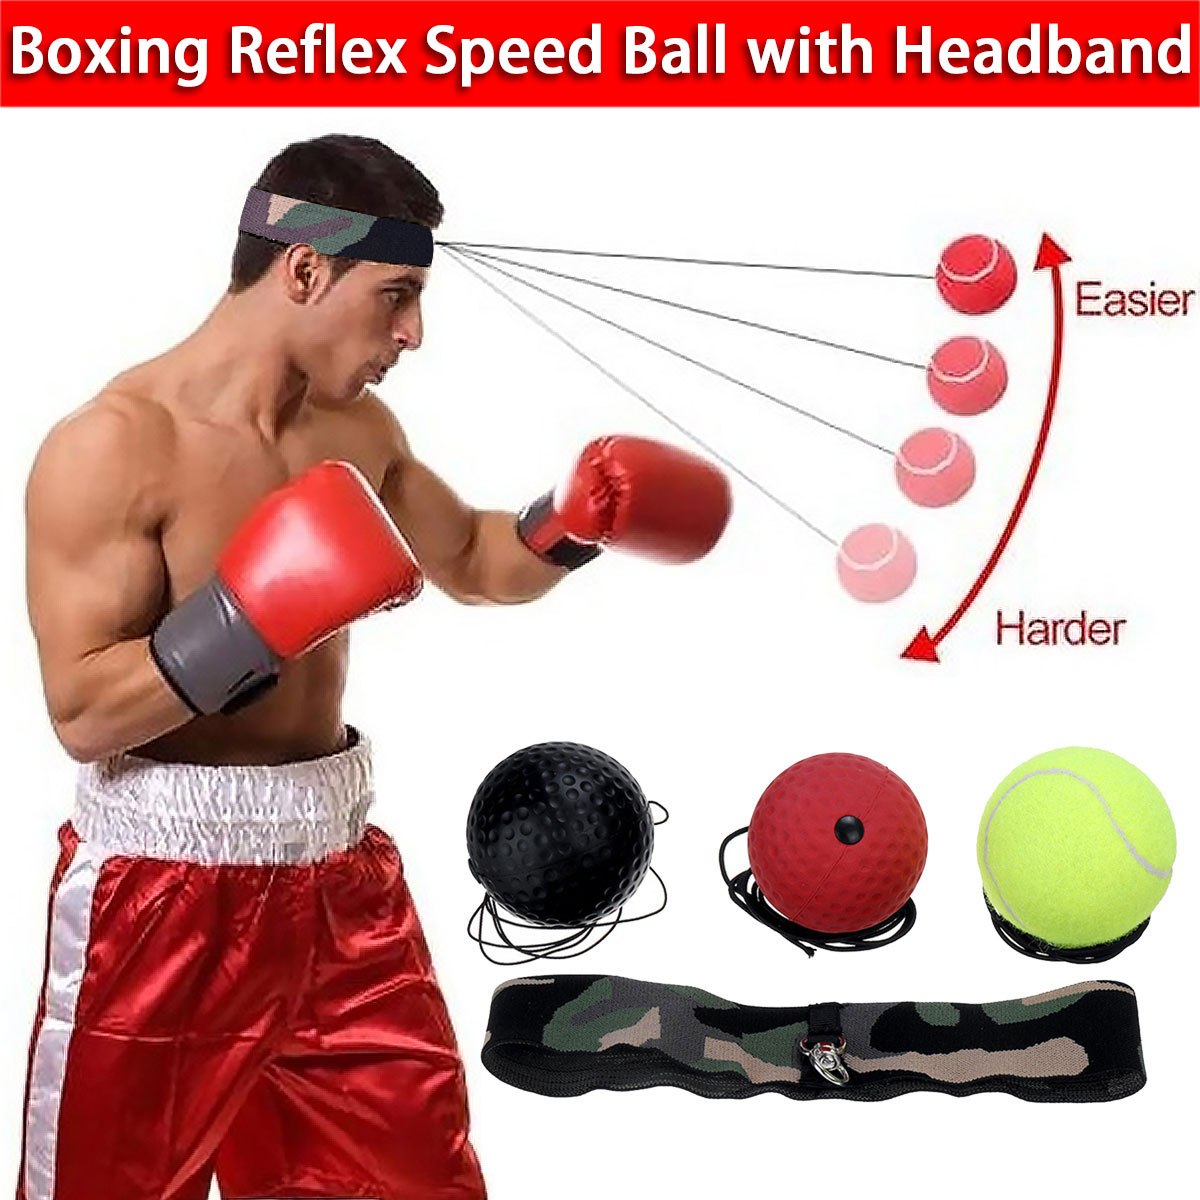 Details about   Boxing Fighting Ball Headband Speed Training Reflex Reaction Gym Workout 3 Balls 